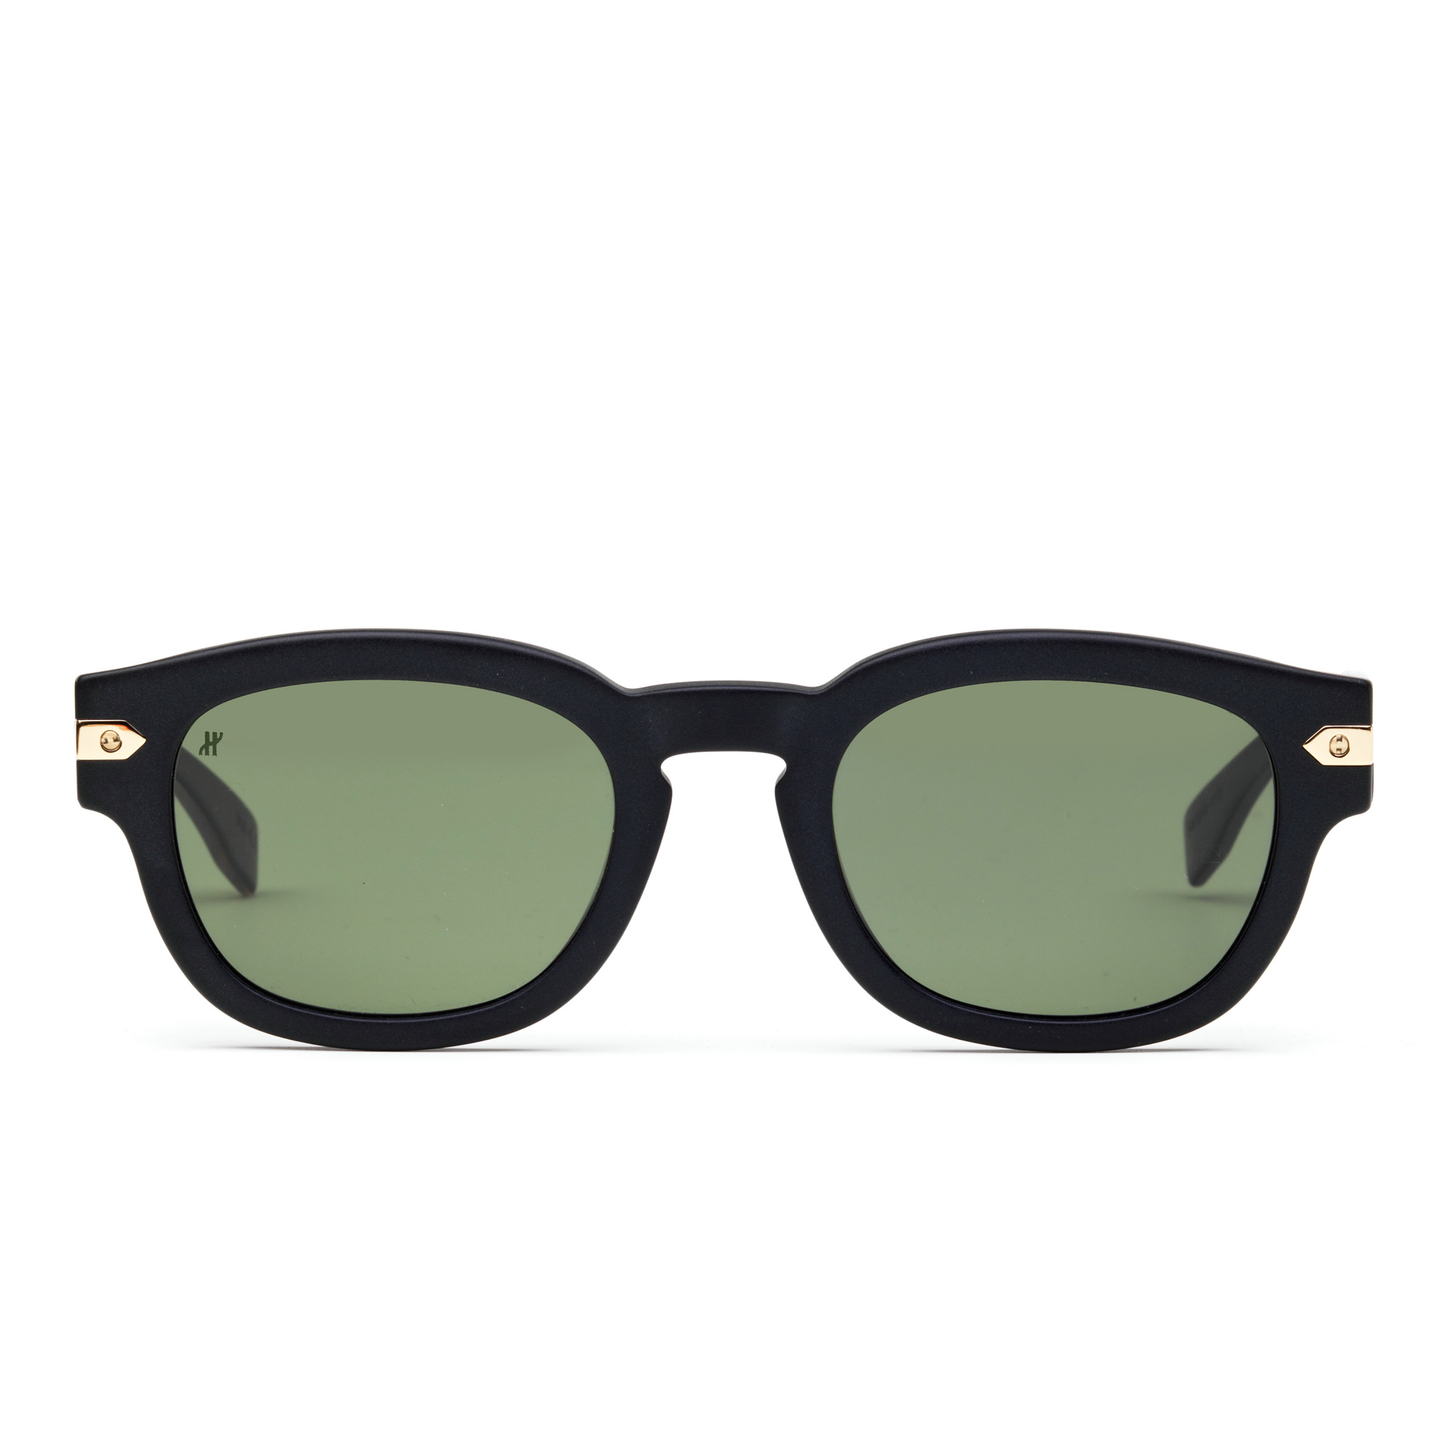 Black Matte Rounded Key Sunglasses with Green Lens